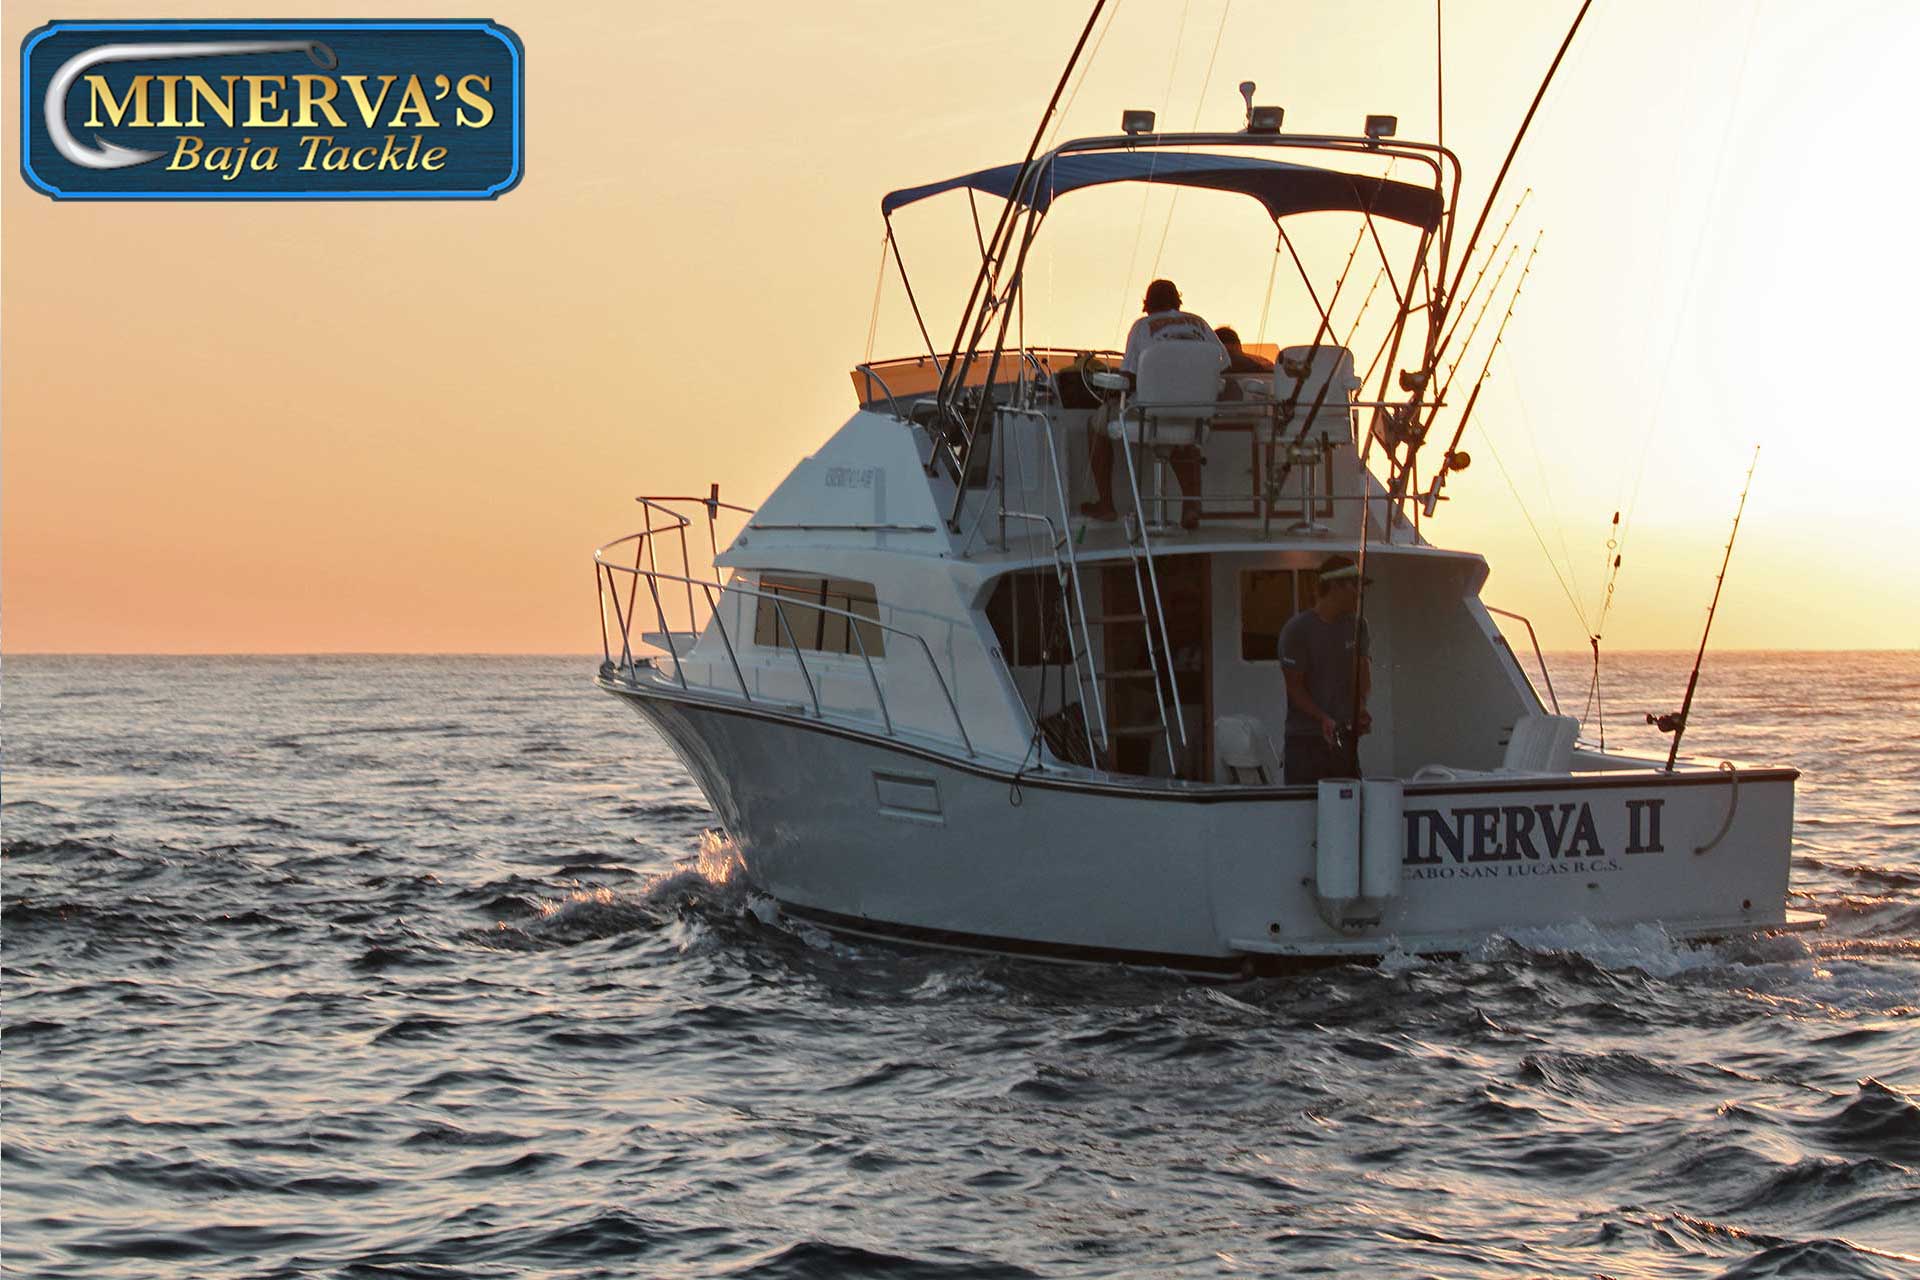 Minerva II is equipped with Shimano reels and Calstar rods